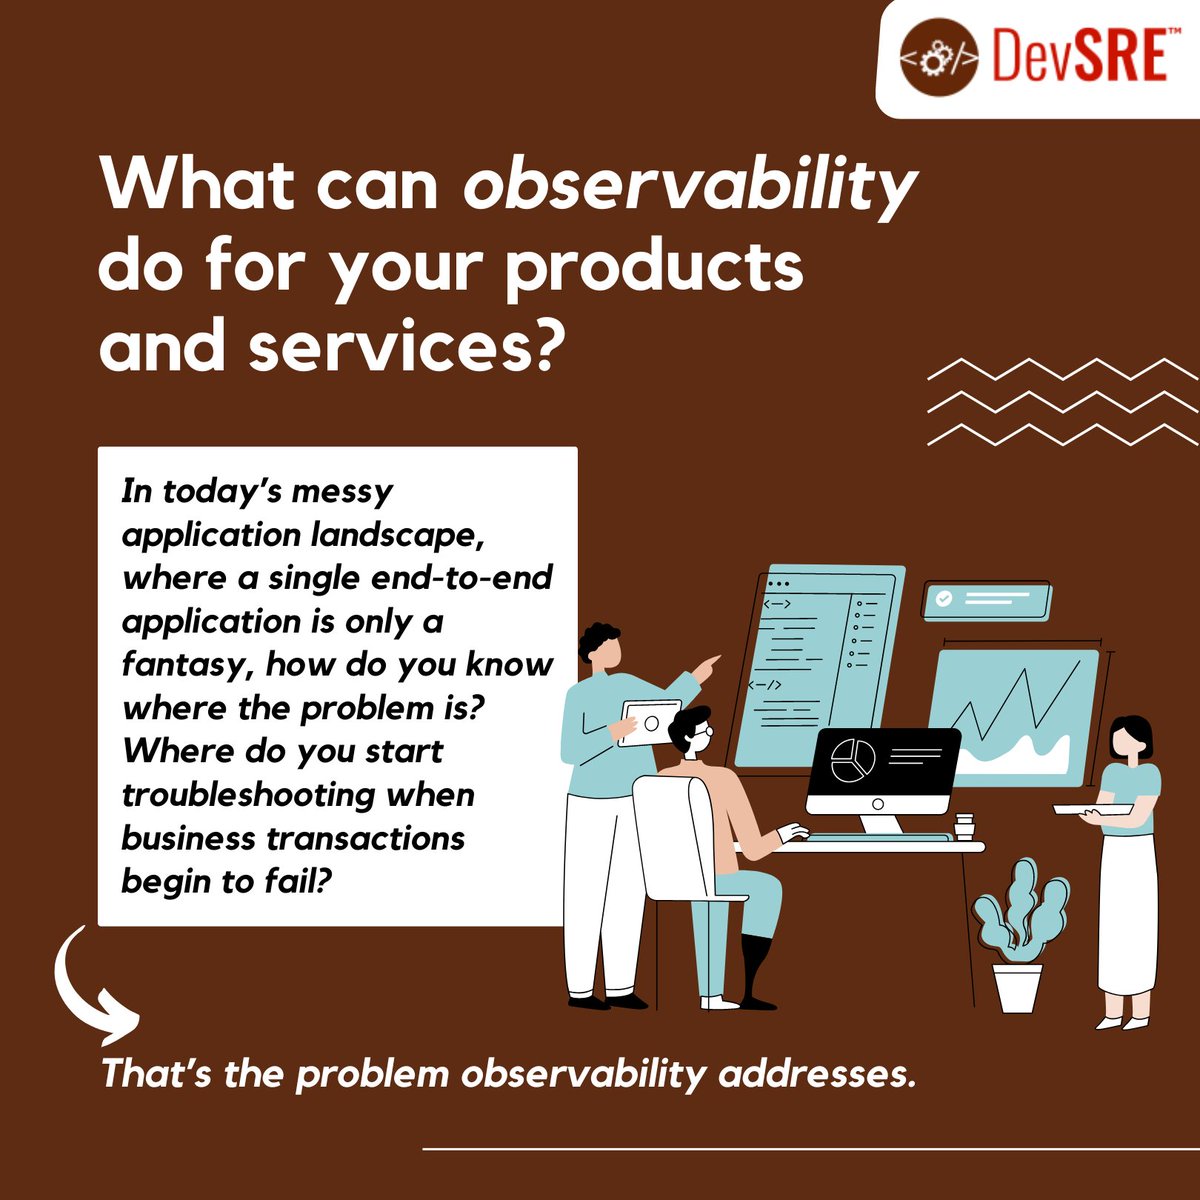 To learn more about observability, get your hands on a modern, unified observability platform. DevSRE can help!
.
.
.
.
#DevSRE #DevOps #SRE #SiteReliabilityEngineering #Tech #Technology  #Product #Service #businesstransactions #observability